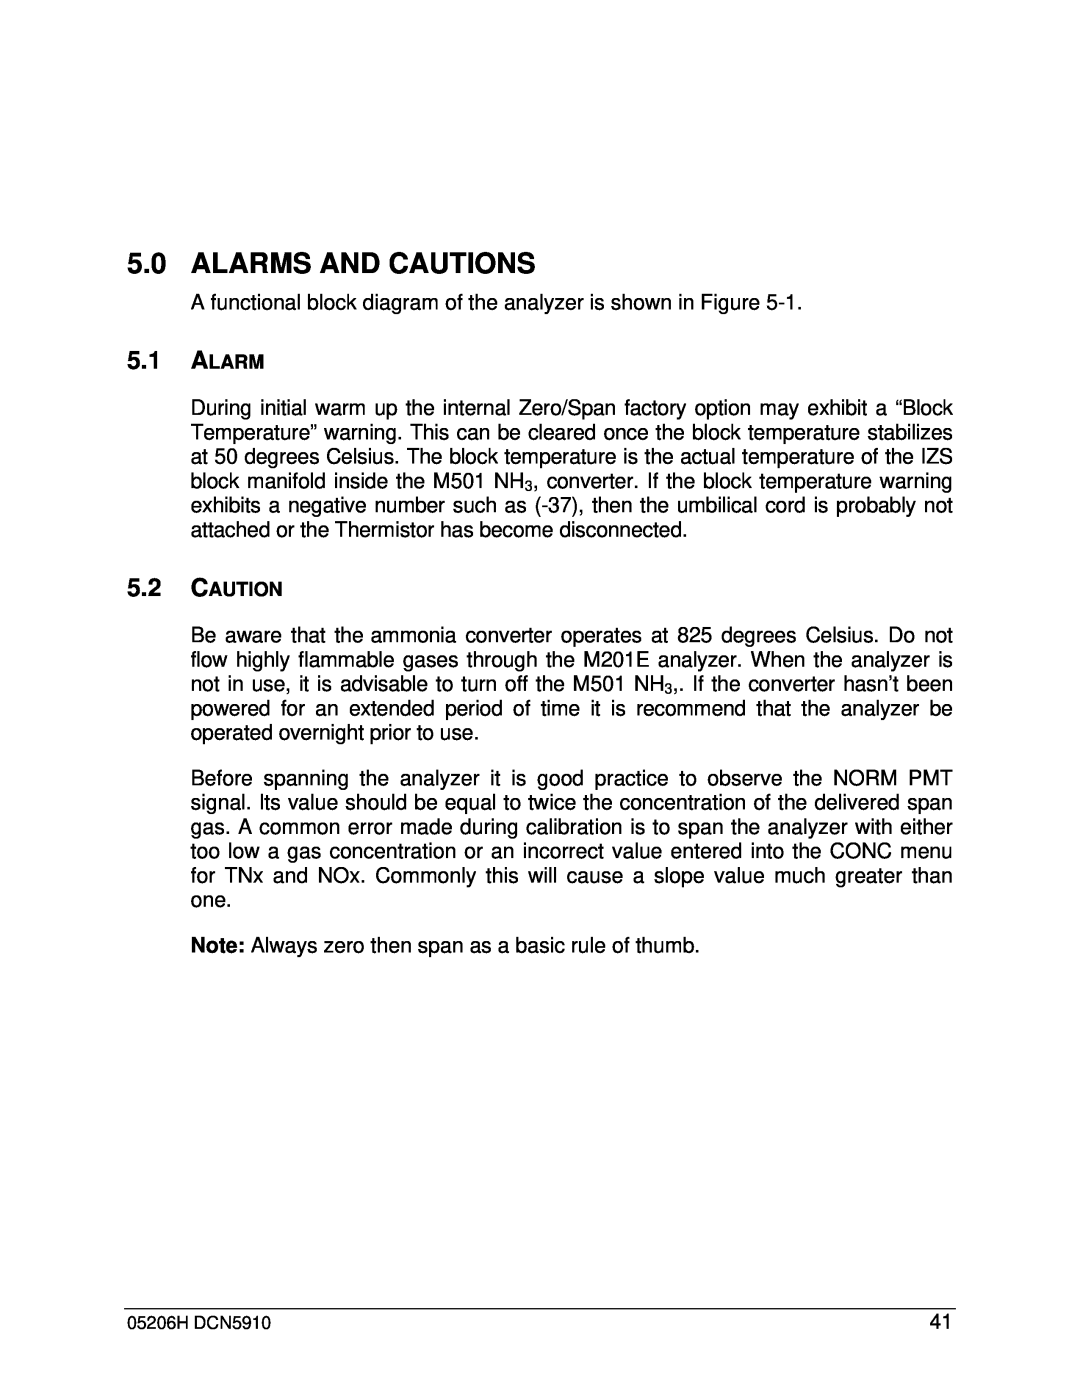 Teledyne M201E manual Alarms And Cautions 